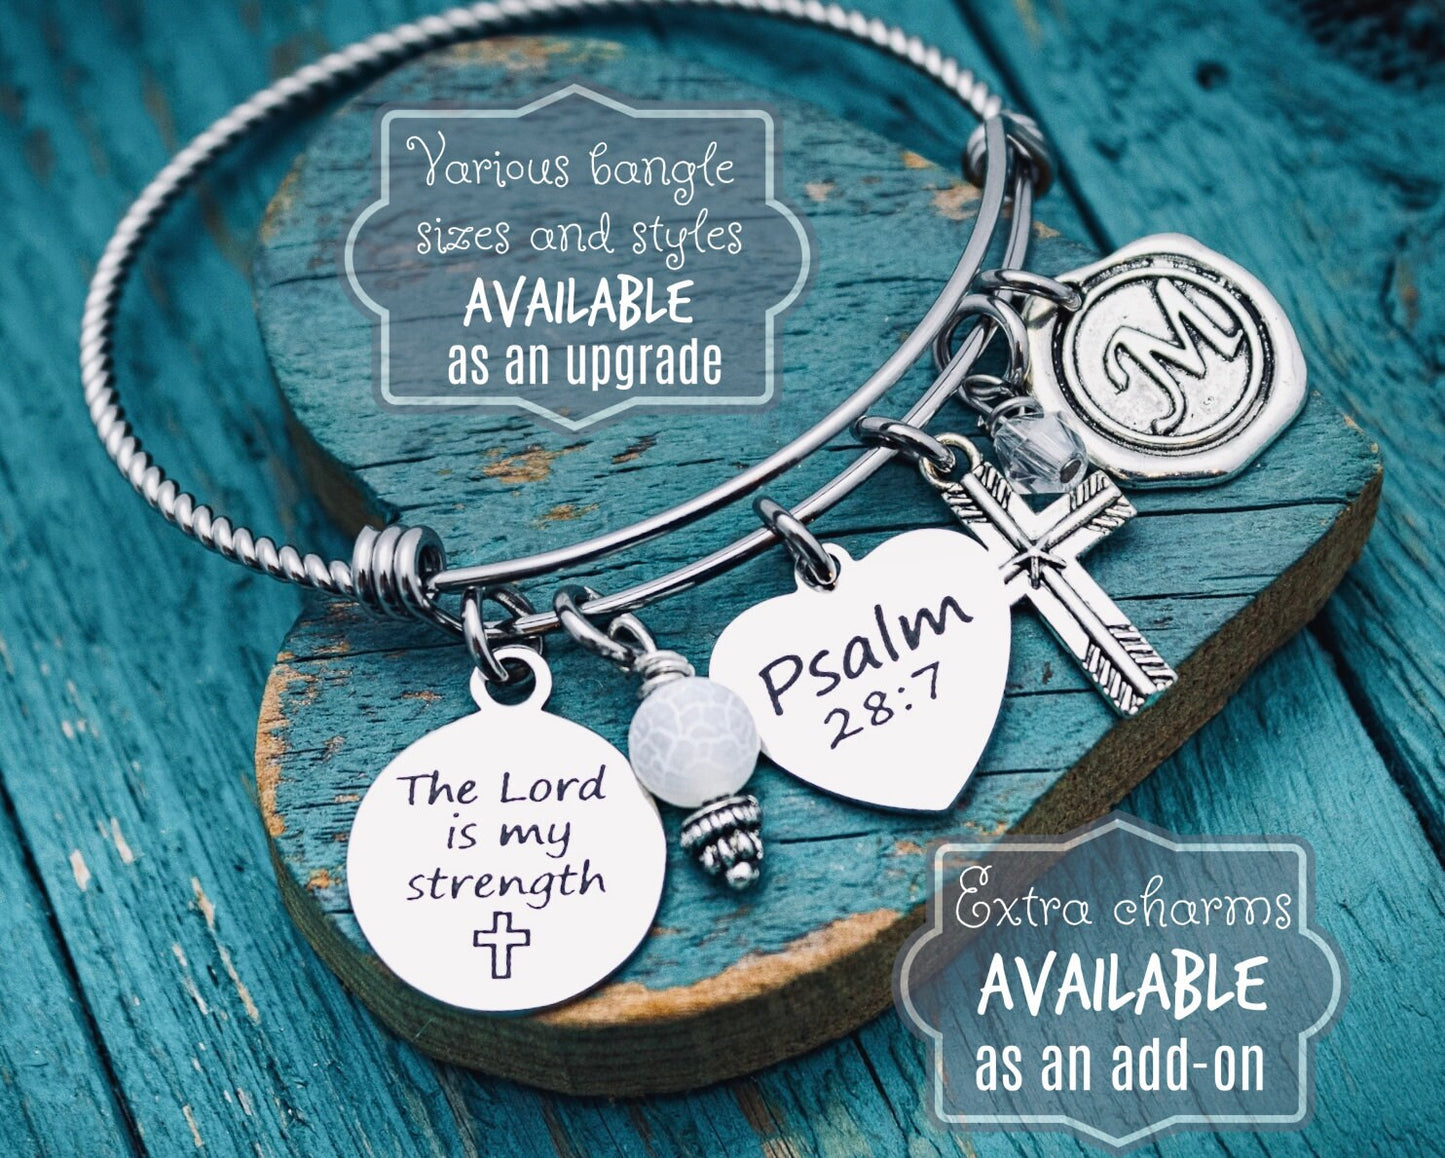 The lord is my strength, Psalm 28:7, Christian, Bible verse, Scripture, Strength, Silver Bracelet, Charm bracelet, silver Jewelry, Gifts,